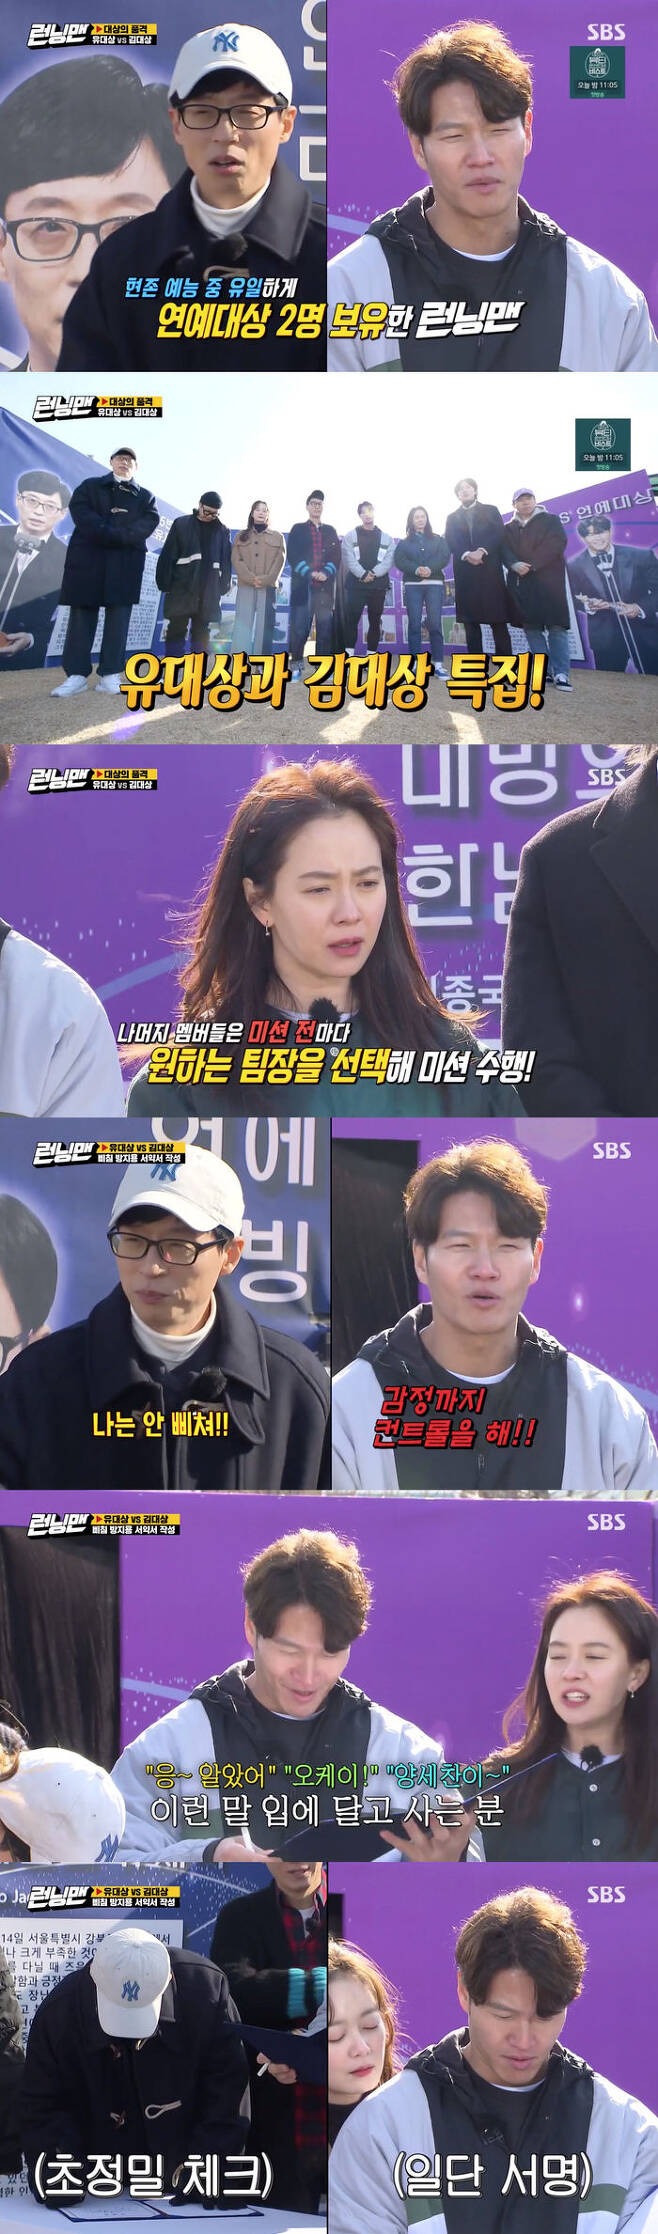 Yoo Dae-sang and Kim Dae-sang wrote a pledge to prevent spraining.On SBS Running Man broadcasted on the 21st, I Musici Race of the Grand Prize was held.On this day, the production team said, We have the only two entertainment objects among the existing entertainment. Yoo Jae-Suk and Kim Jong-kook Memorial Hall opened a special opening.Then the crew said, Running Mans pride! Core! Heart!I will go to the I Musici Race, which is centered on two winners of the unusual entertainment prize. And the crew selected the team leader who wanted each mission before each mission and made a pledge to prevent the pludge for the protection of the members according to the rule that they should perform the mission together.Then Yoo Jae-Suk said he would never be pissed, and Kim Jong-kook was trying to control his feelings.And the members laughed at the suggestion that they would not be pissed, not look at, Yes, okay, Yang Se-chan does not do as an addition to the pledge.Lee Kwang-soo also asked him to add Do not look at Snake in front of the viewer while whispering with another person, do not look at Snake, and Kim Jong-kook sent a hot look to Lee Kwang-soo.